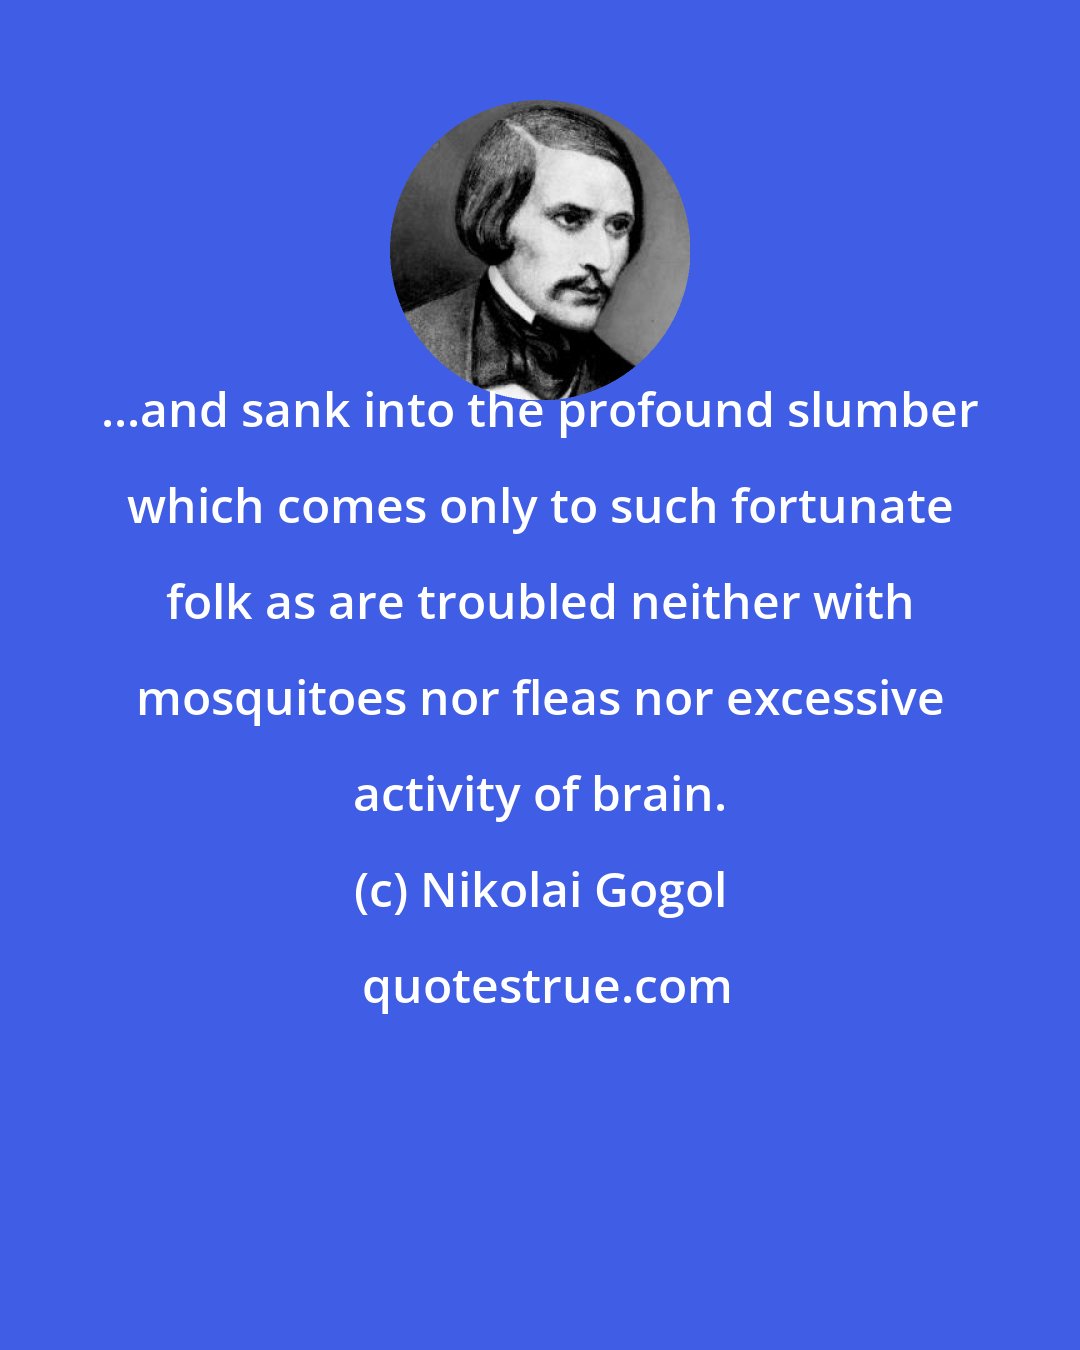 Nikolai Gogol: ...and sank into the profound slumber which comes only to such fortunate folk as are troubled neither with mosquitoes nor fleas nor excessive activity of brain.